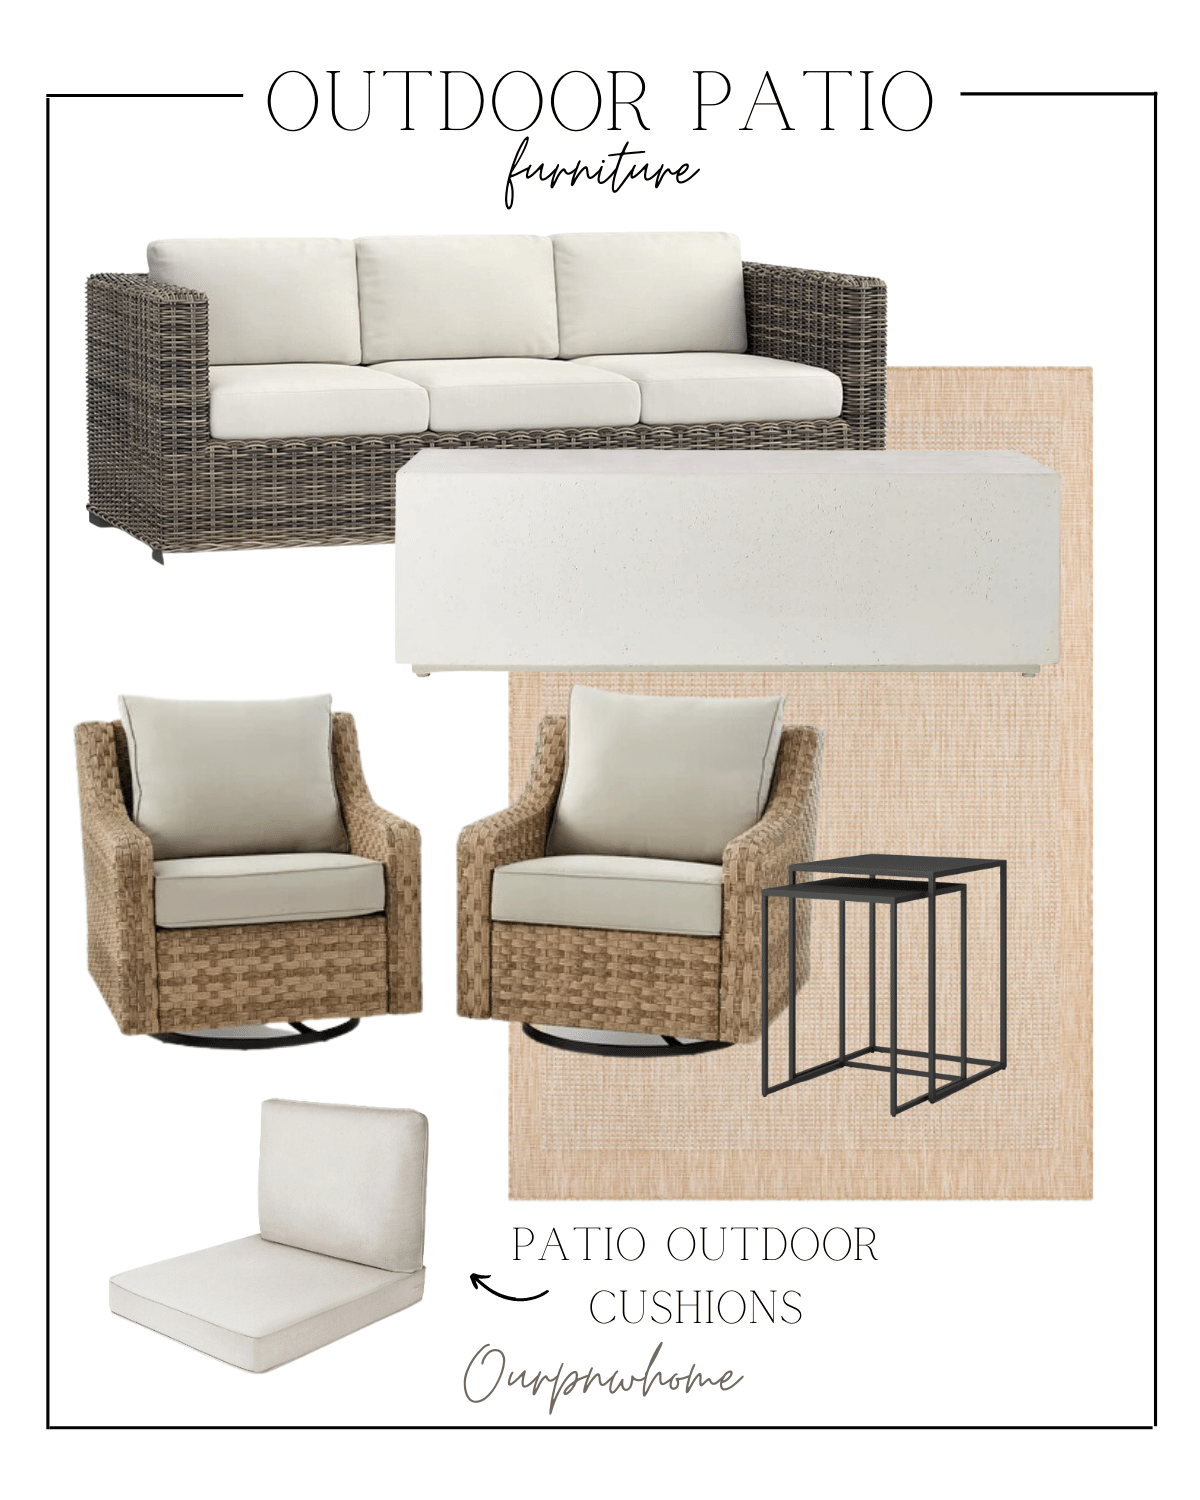 outdoor patio, furniture, patio furniture, outdoor seating, patio essentials, love seat, swivel chairs, outdoor patio rug, side tables, patio finds 